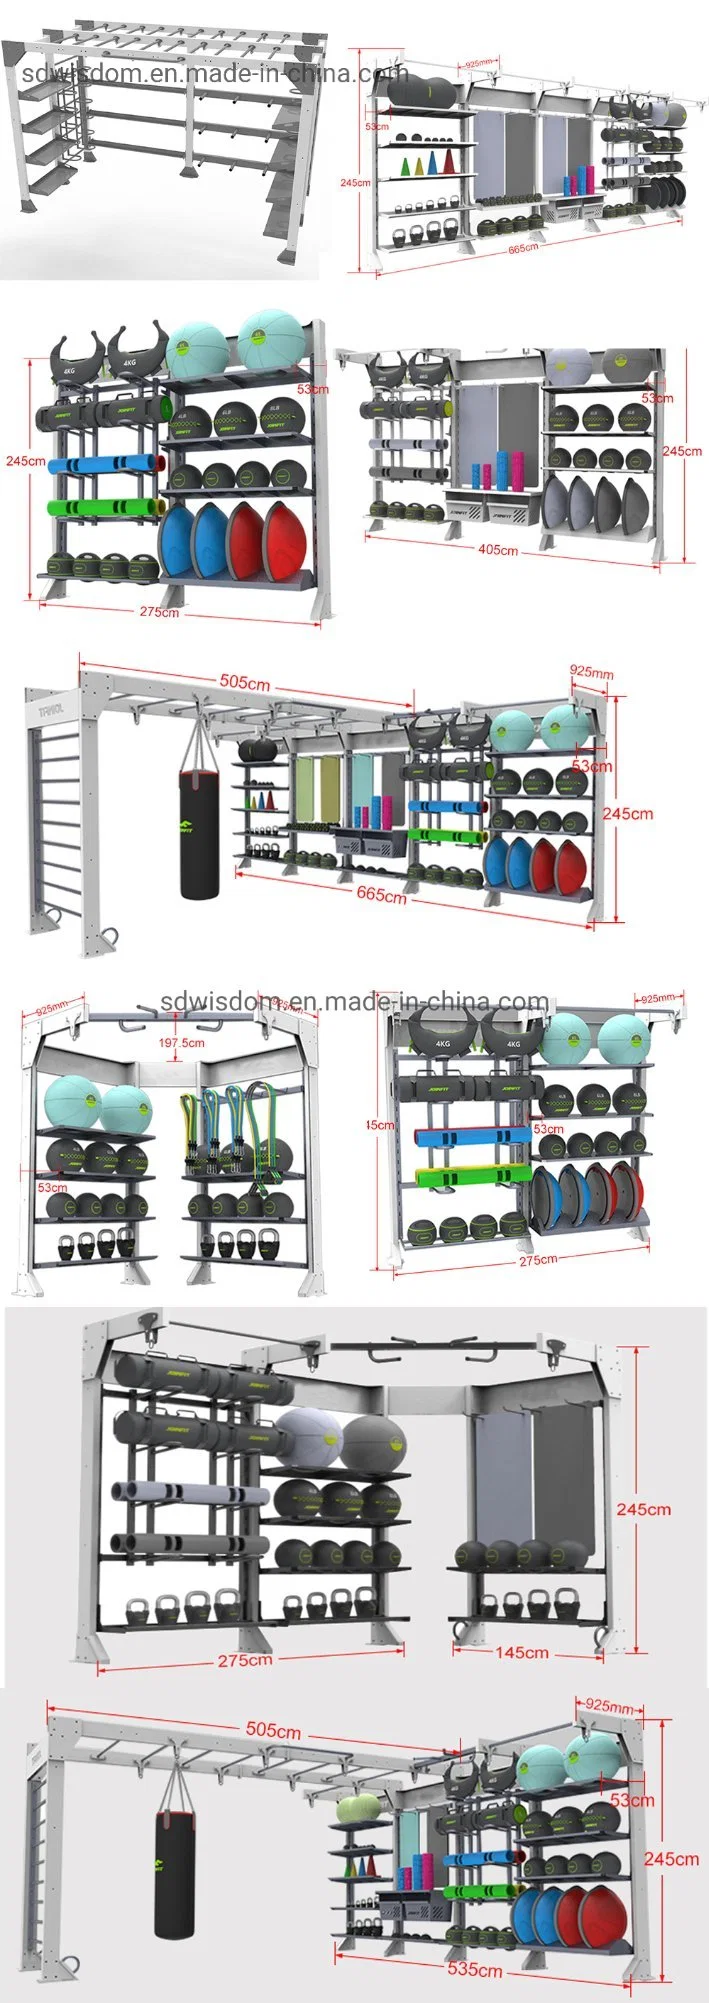 Gym Equipment Home Cross Fit Equipment Multi Storage Rack Barbell Plate Dumbbell Kettlebell Rack for Gym Accessories